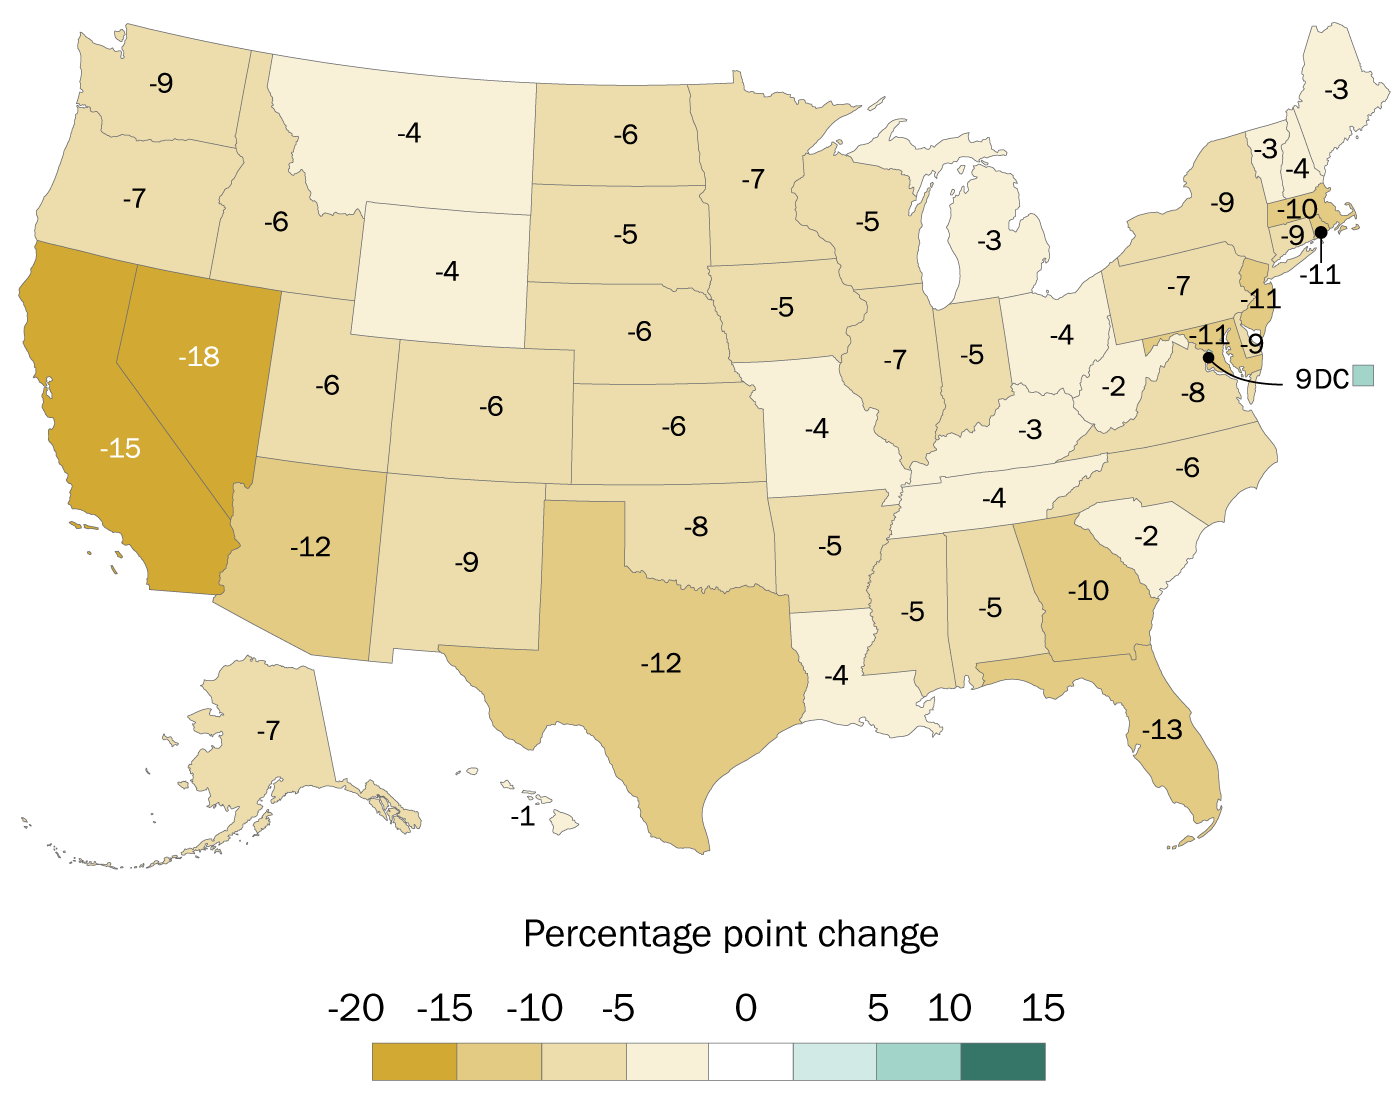 Percentage point change in the non-Hispanic White share of each state’s eligible voters, 2000 to 2018